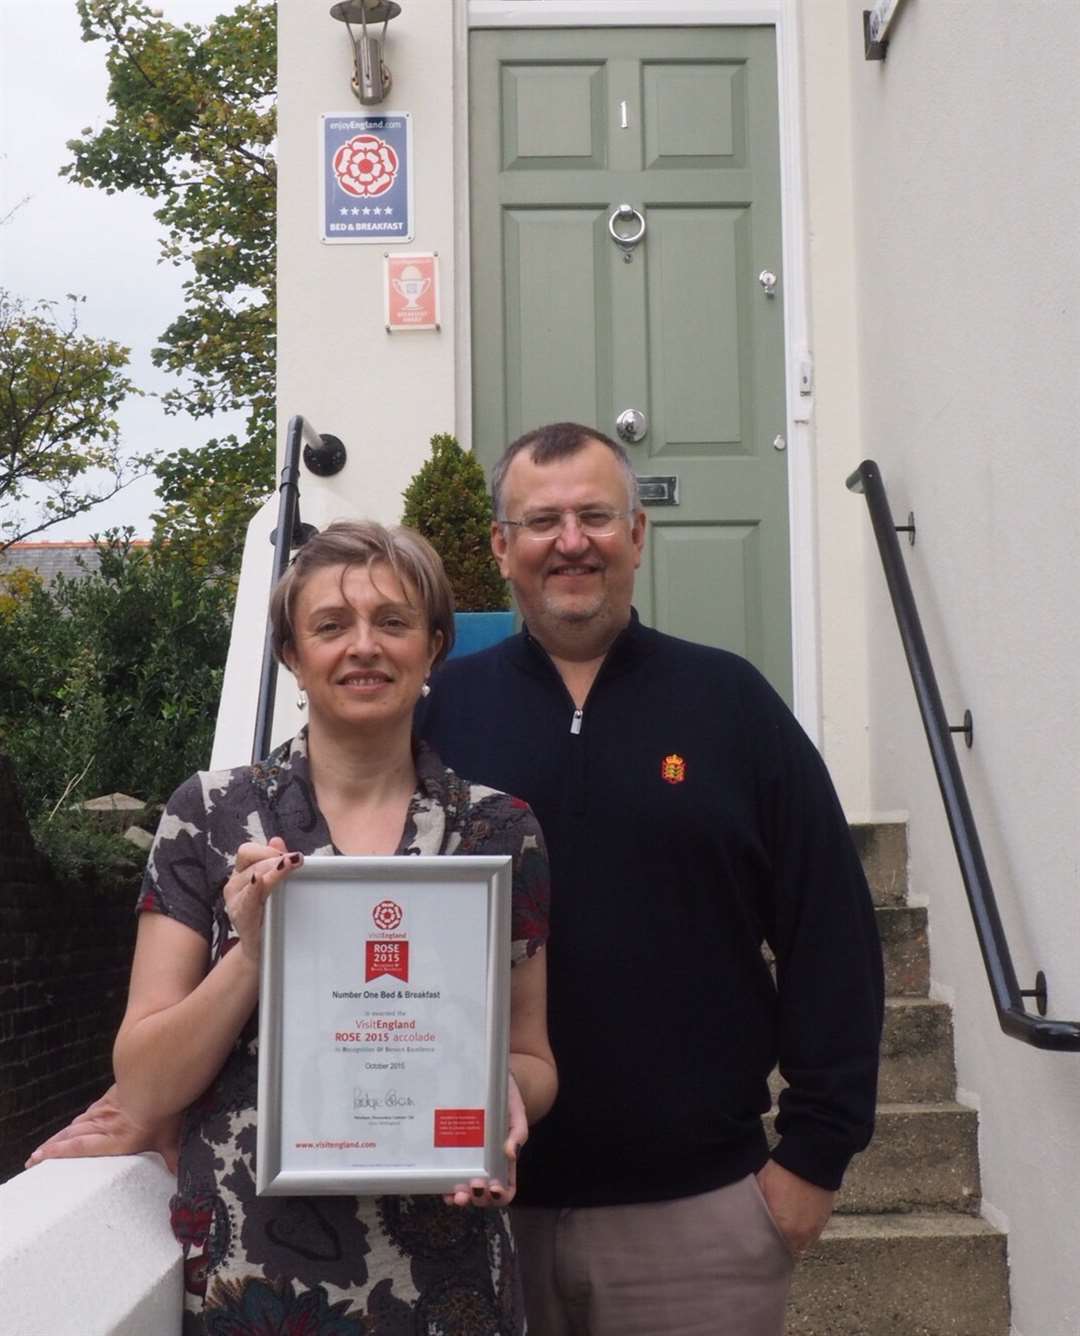 Nicky and Mark Chaplin with their Rose award certificate